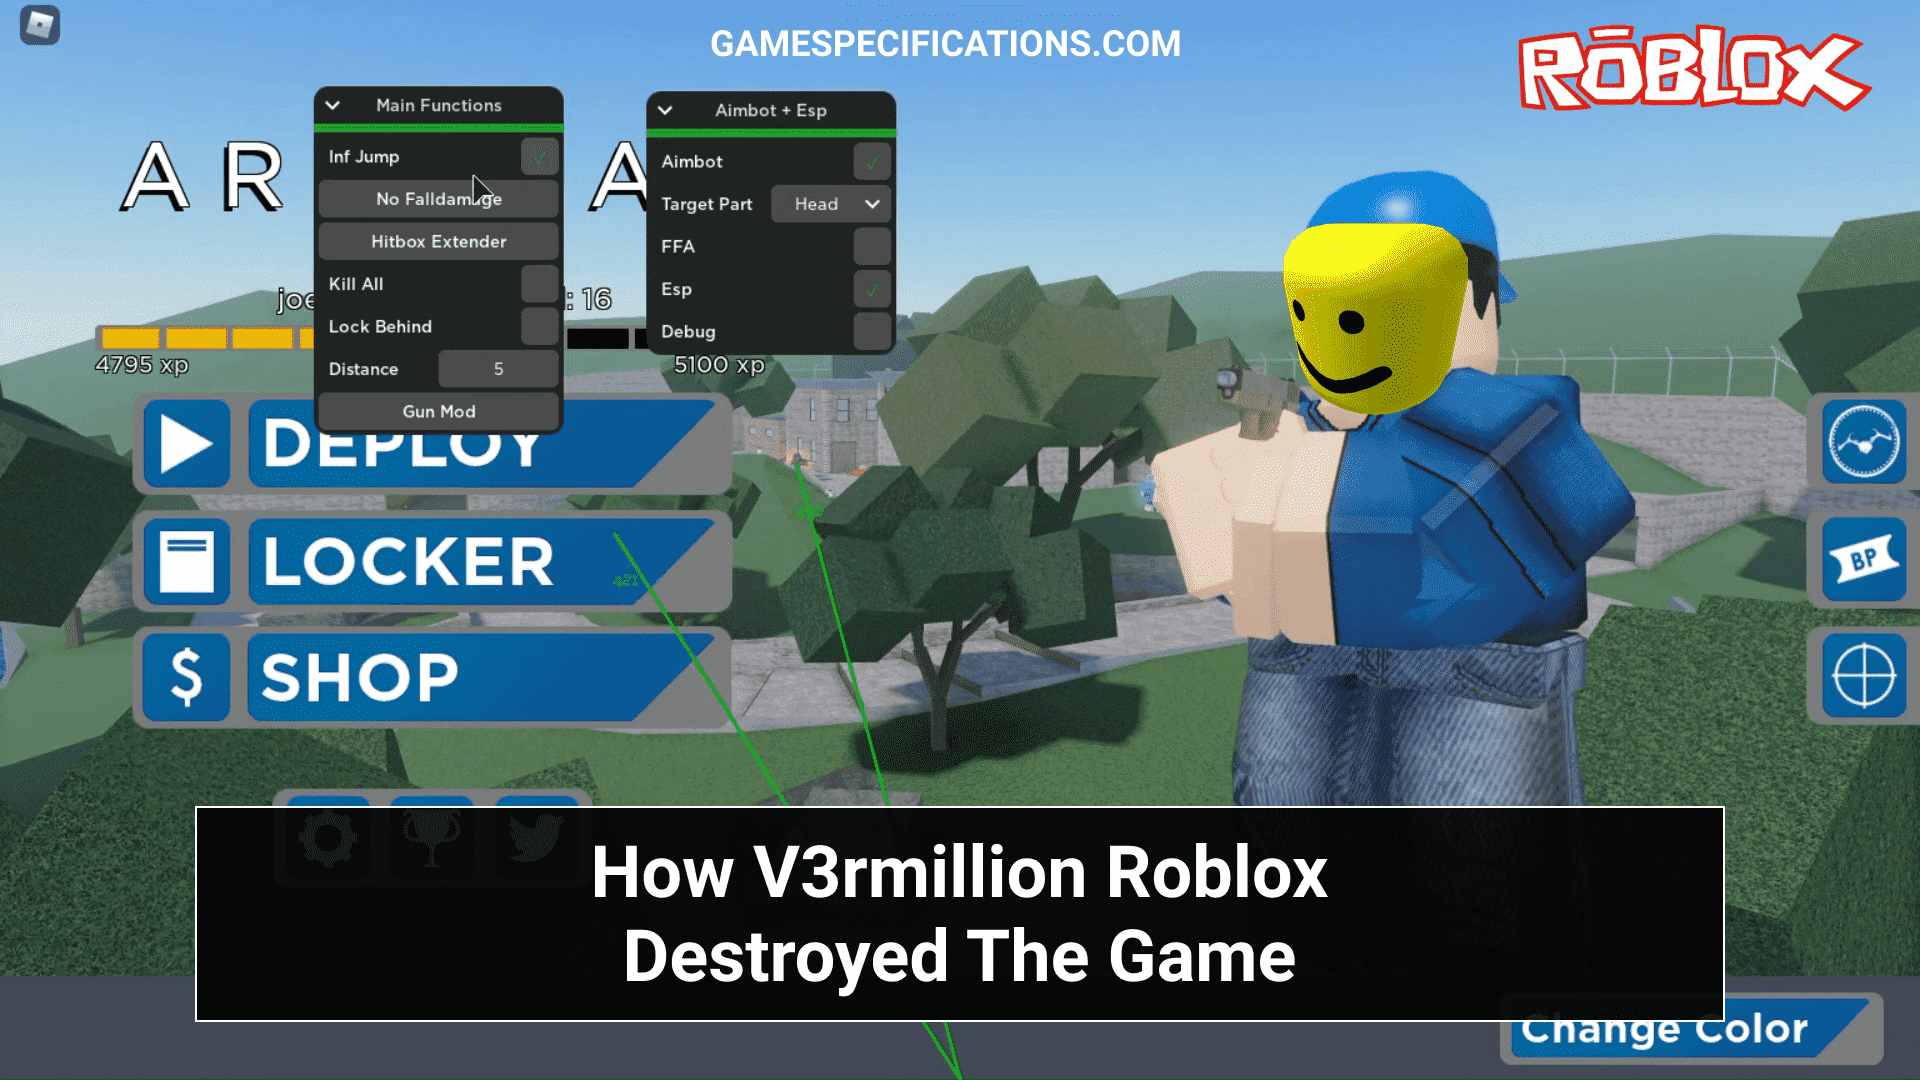 V3rmillion Roblox Breaked The Game By Using Powerful Exploits And Scripts Game Specifications - roblox hacks vermillion